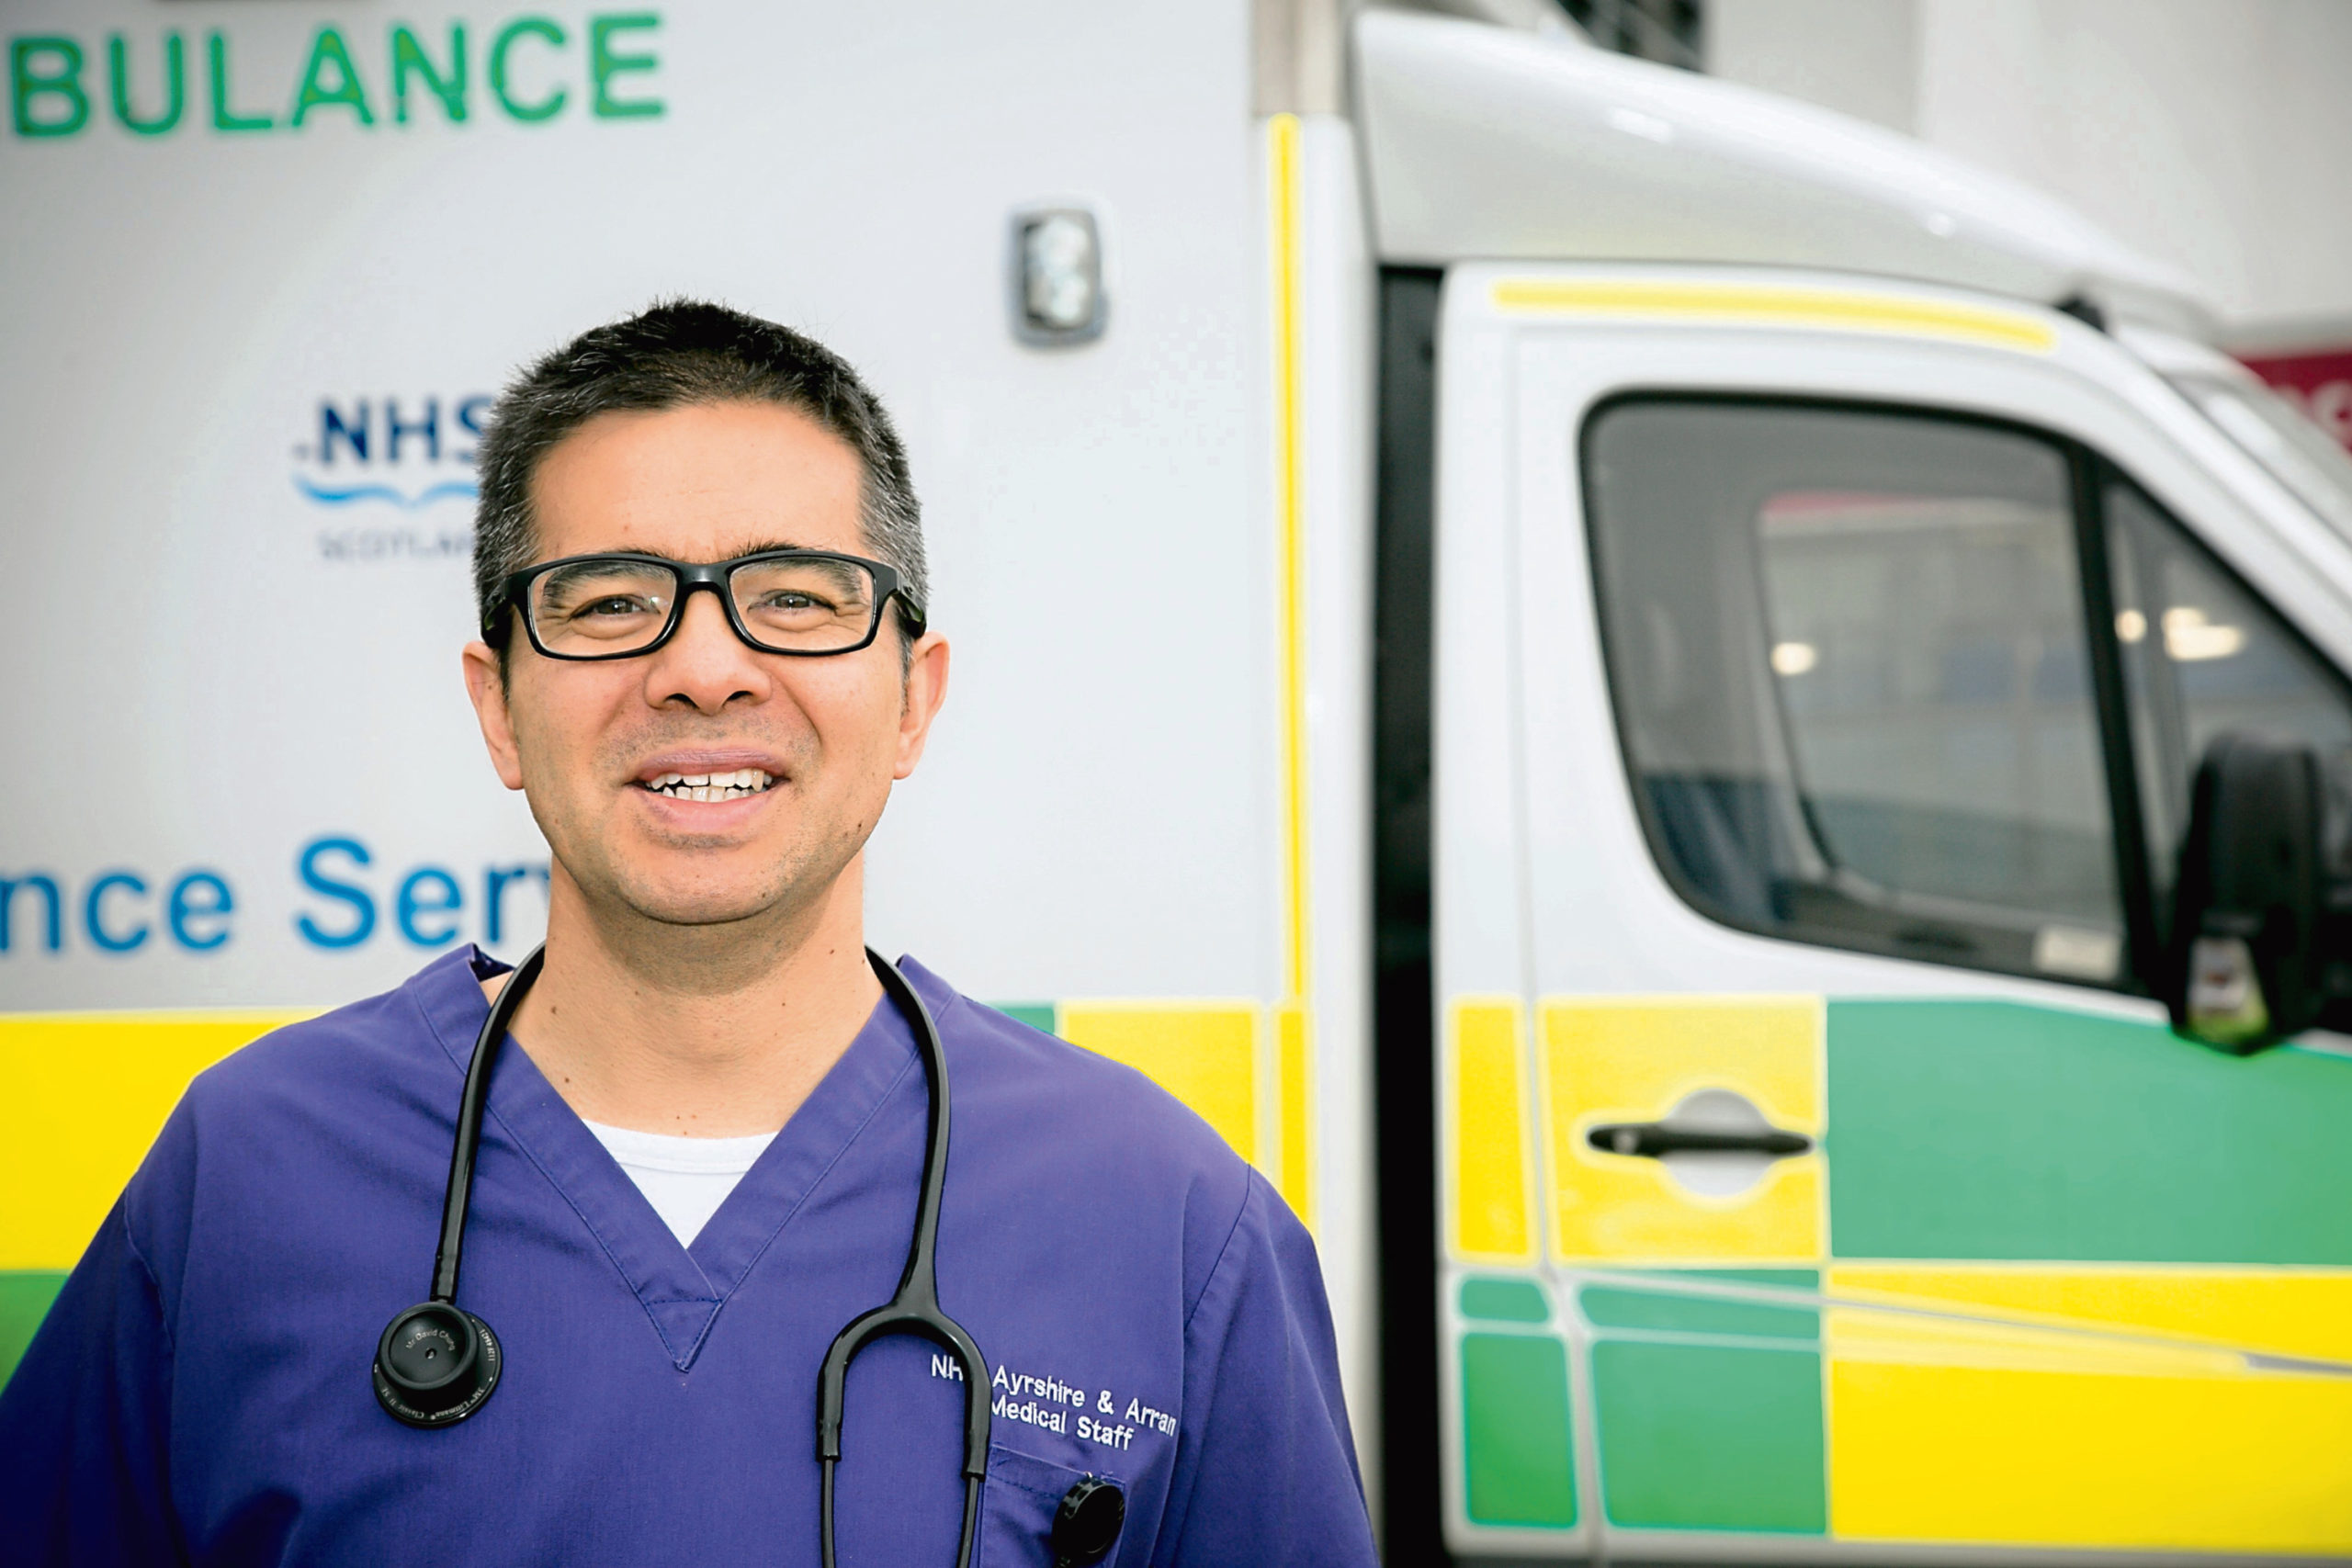 Dr David Chung, president of The Royal College of Emergency Medicine in Scotland